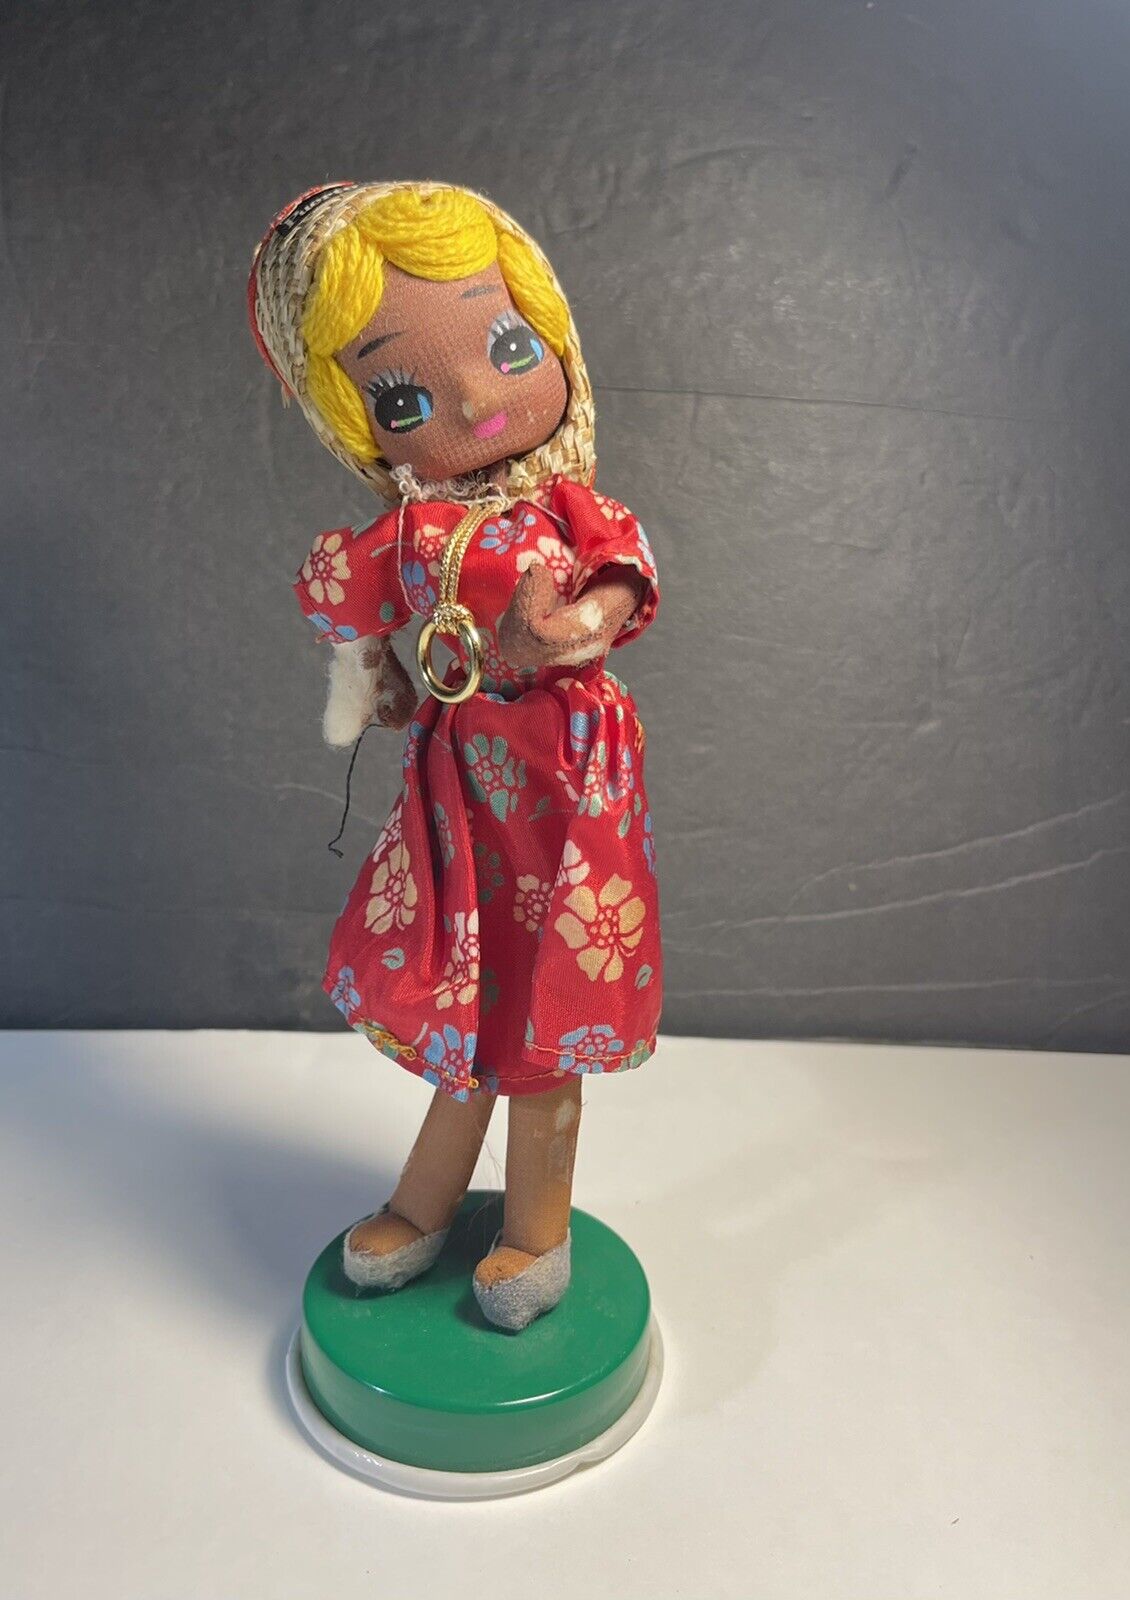 Vintage Big-Eyed Posable Puerto Rican Girl Figurine 1960s Made In Japan 8”